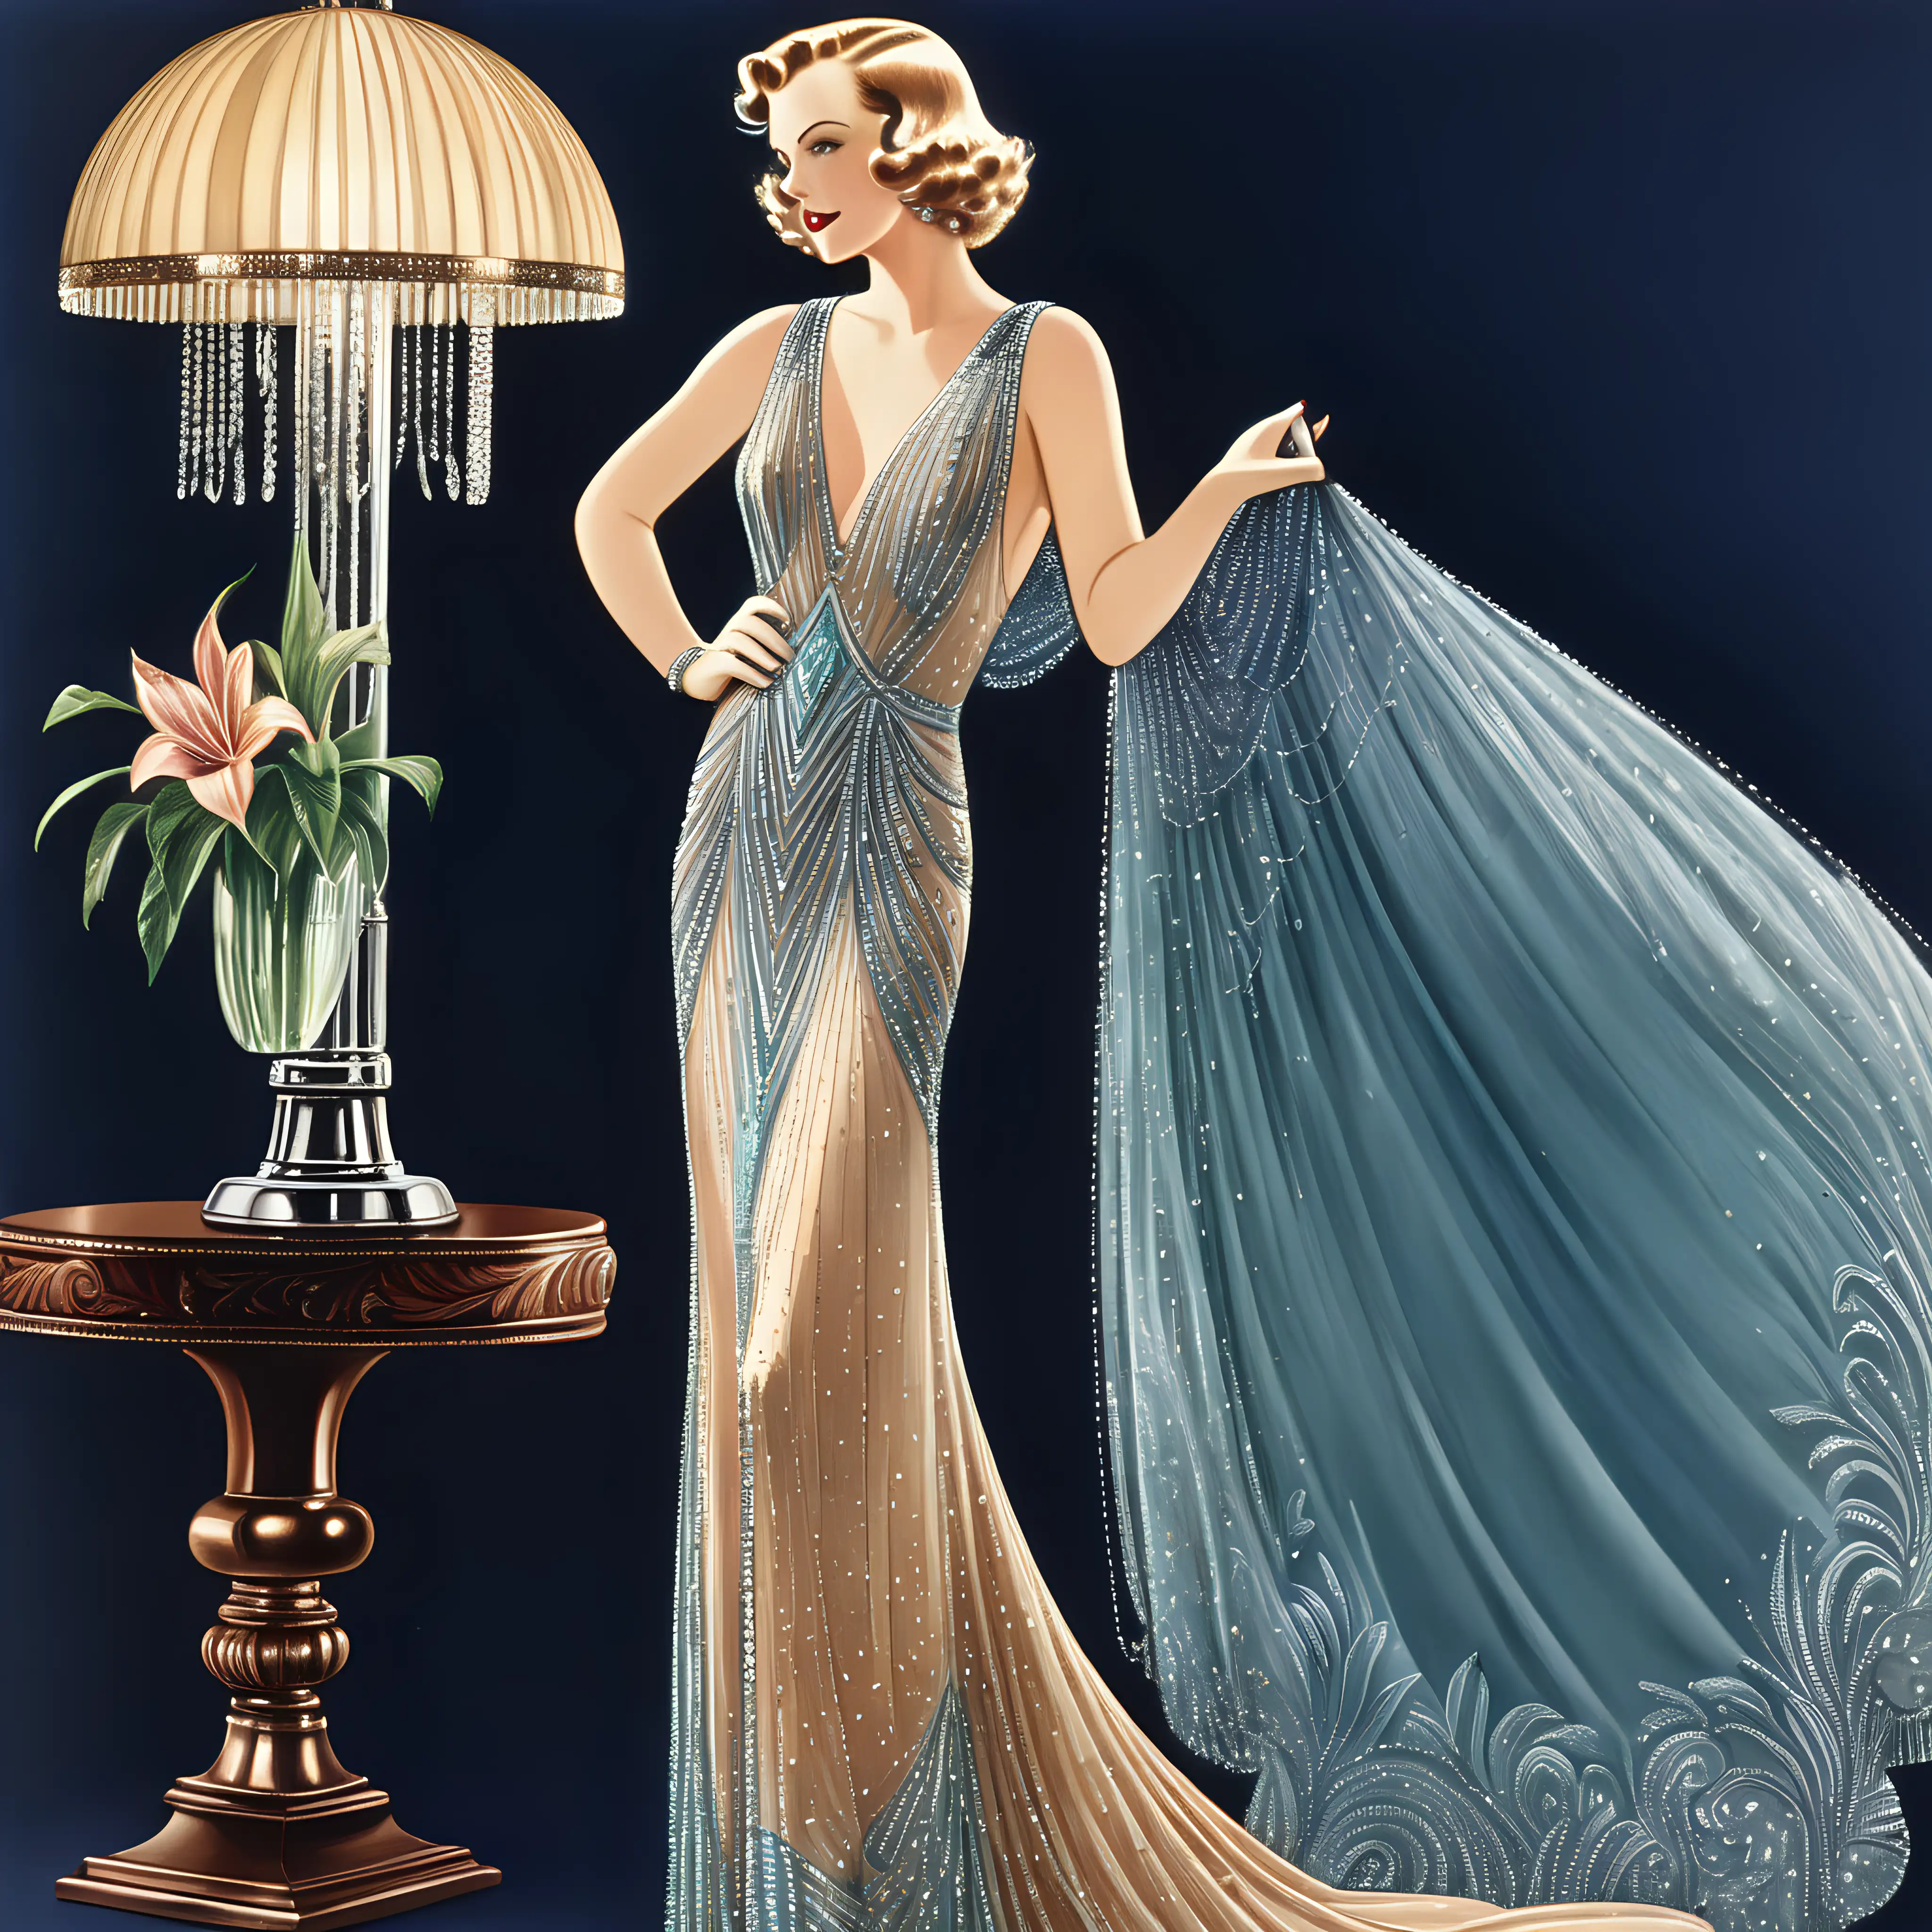 Elegant Woman in 1930s Hollywood Evening Gown with Intricate Beading